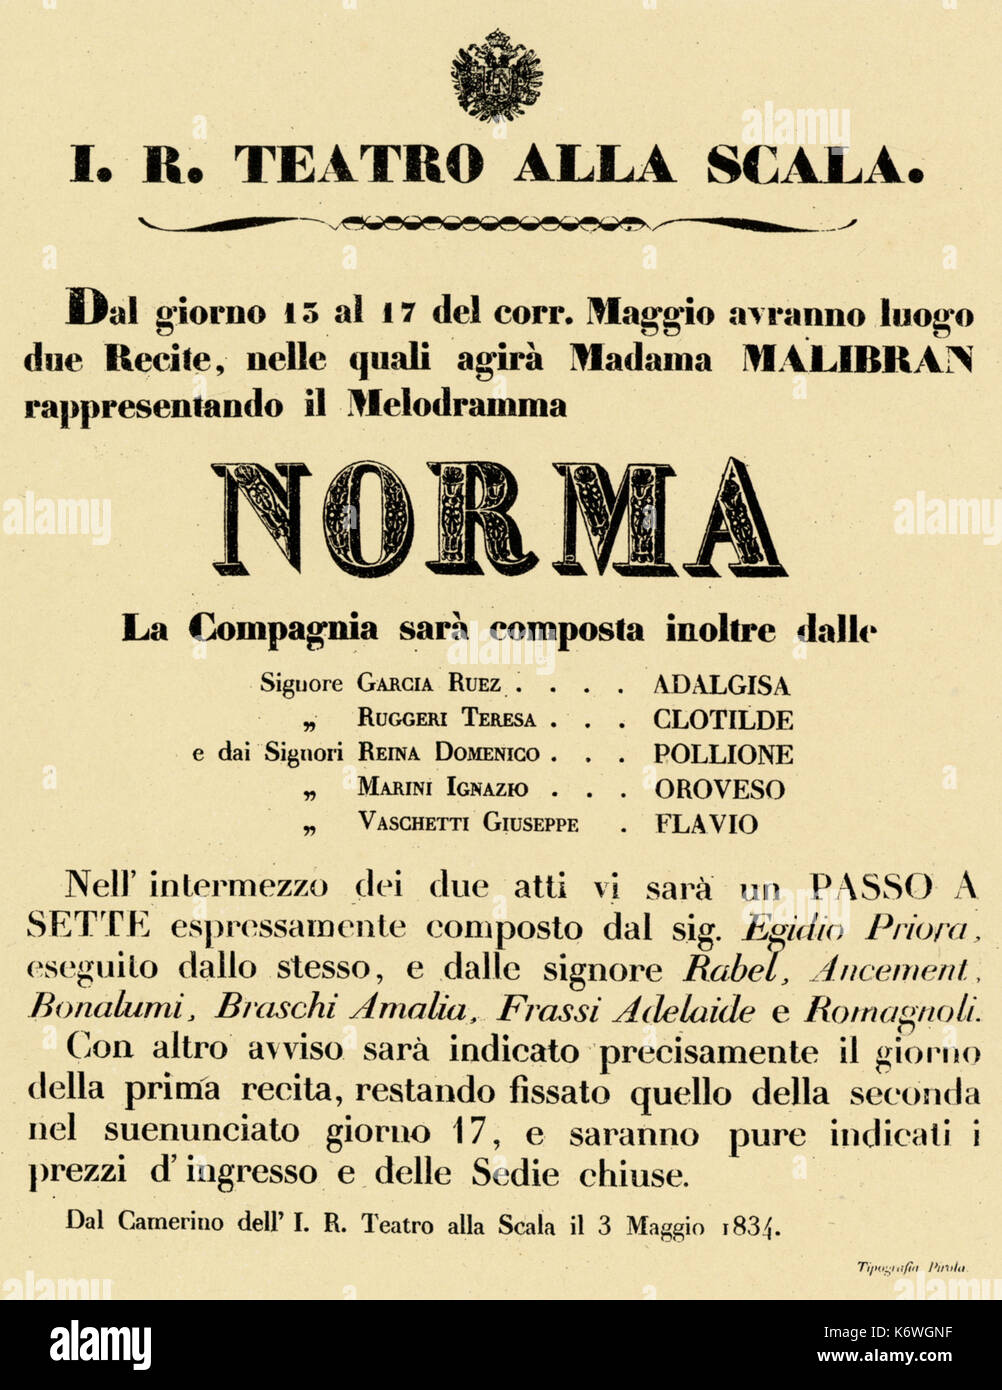 BELLINI , Vincenzo- NORMA  - Poster for production at La Scala, Milan, with Malibran in title role.  15-17 May, 1834  Italian composer, 3 November 1801 - 23 September 1835 Stock Photo